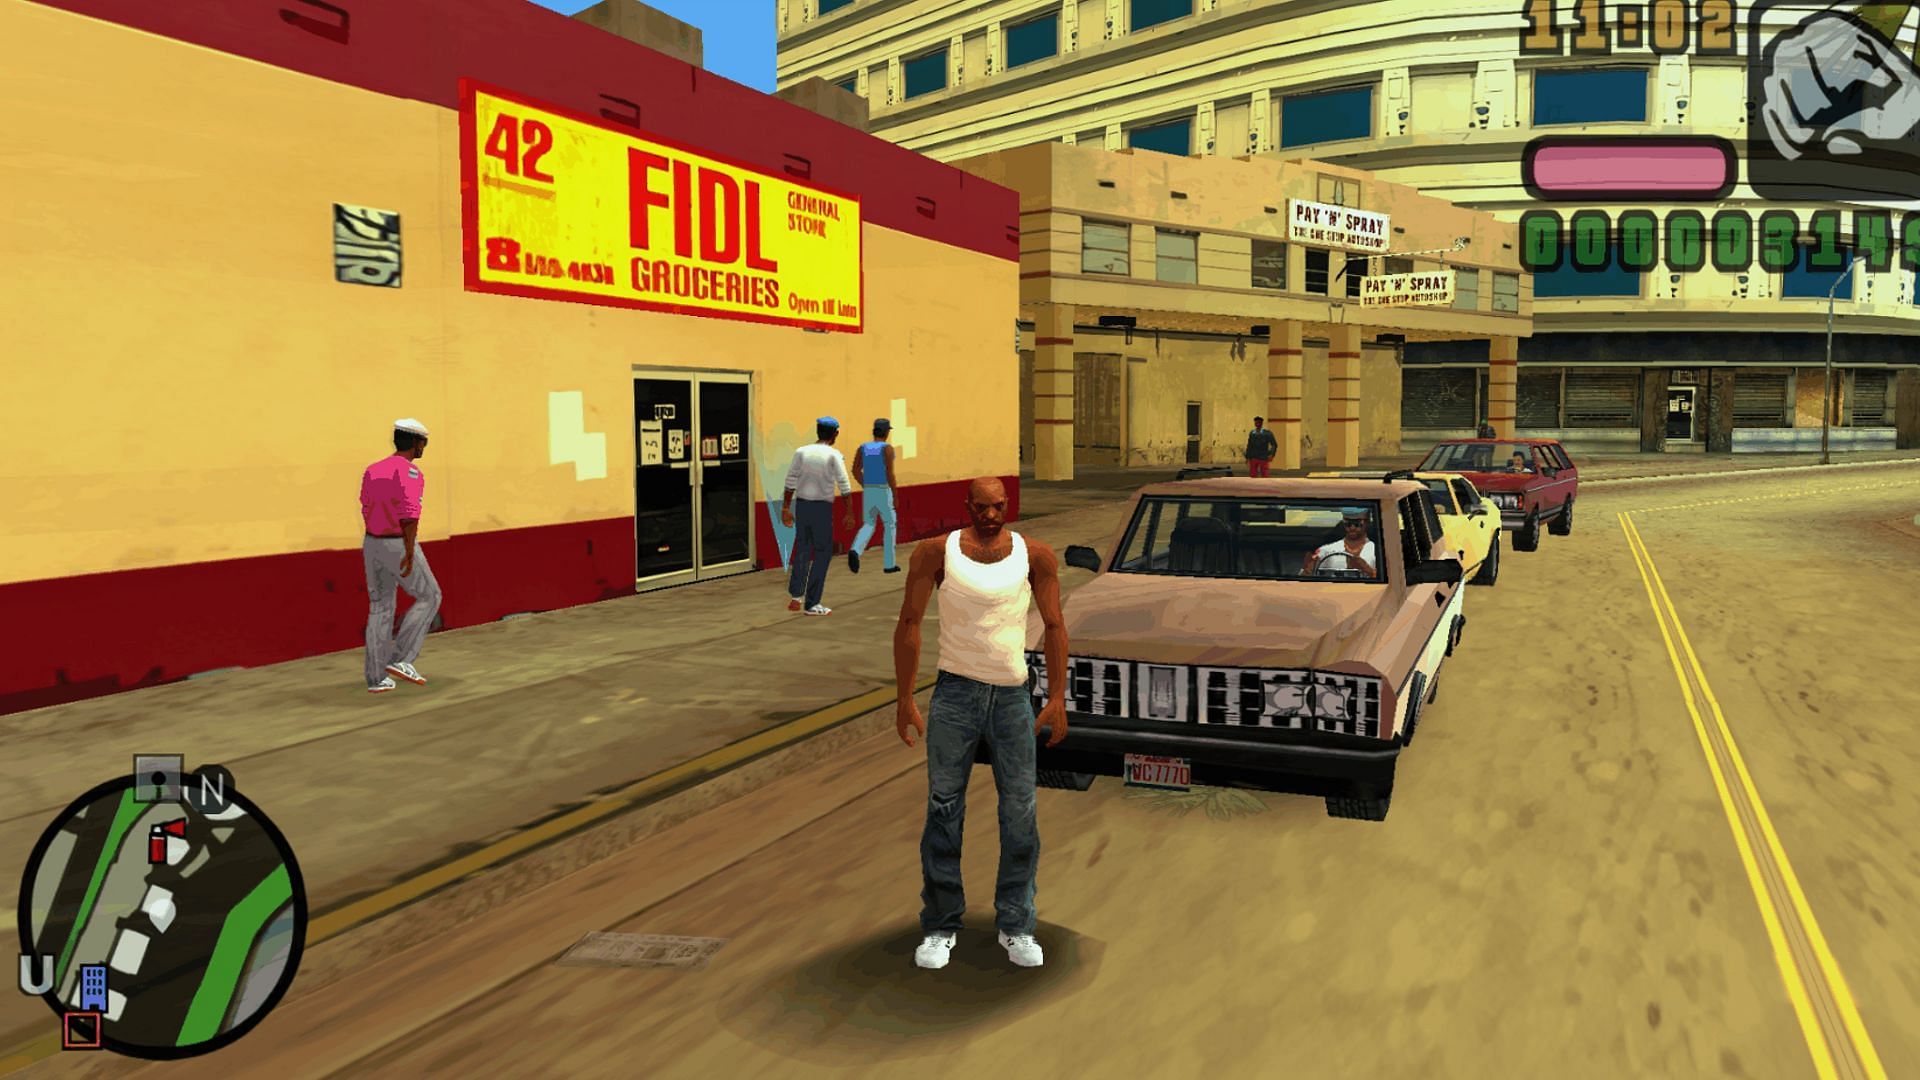 17 YEARS LATER  WHY GTA LIBERTY CITY STORIES IS STILL WORTH PLAYING? 